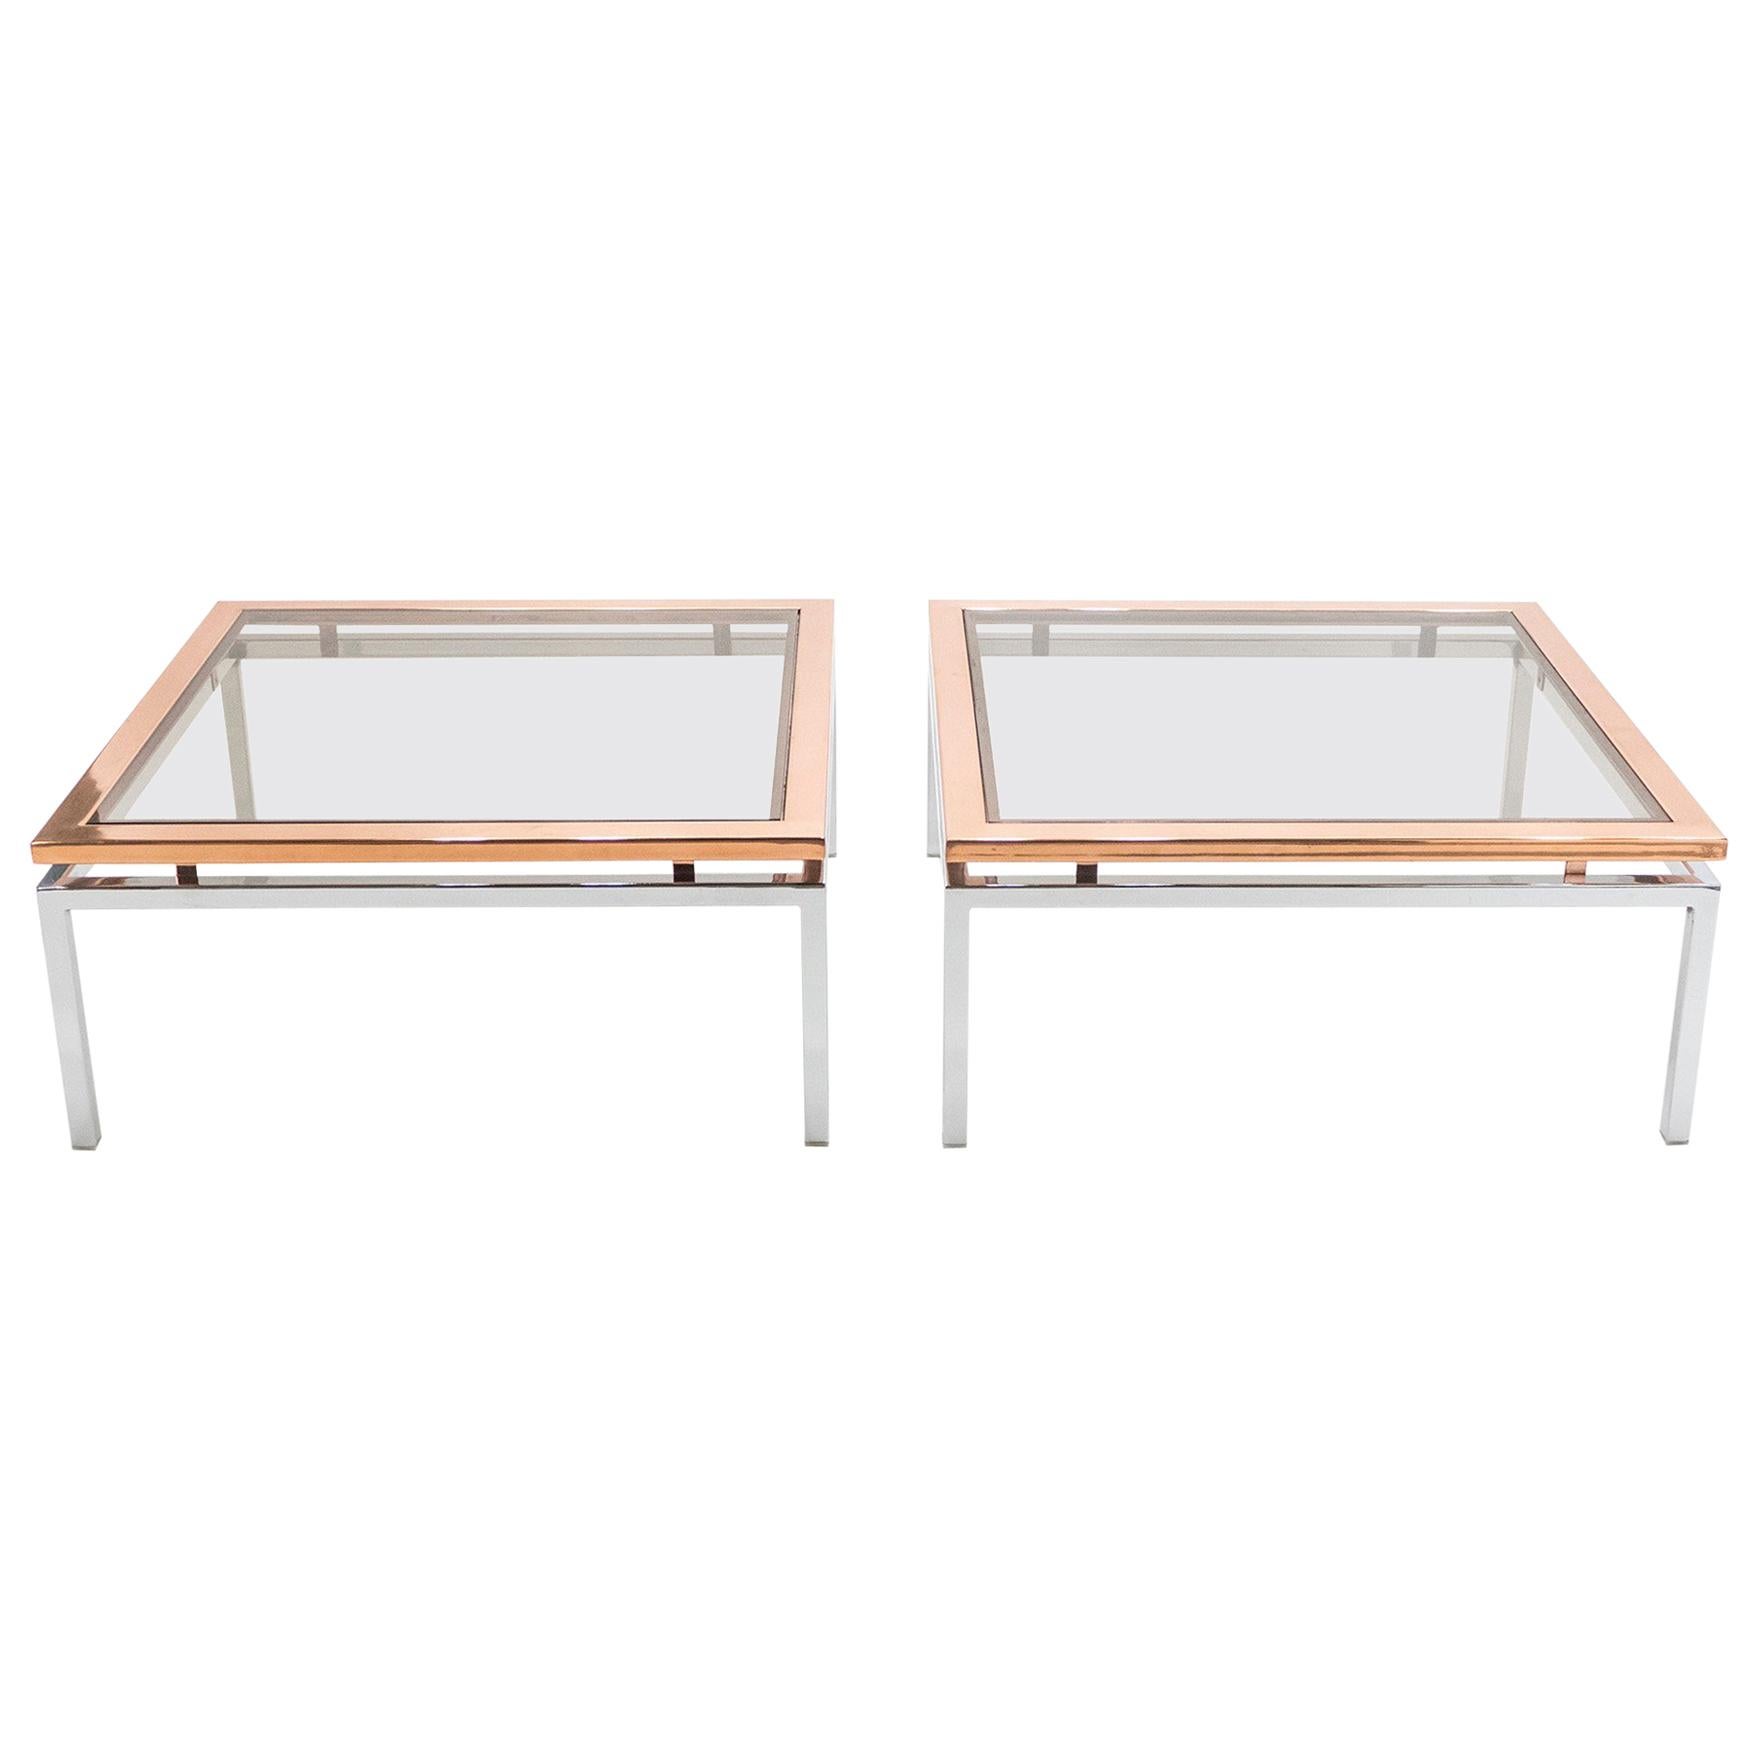 Simple lines and shiny metal point to this pair of coffee tables French Hollywood Regency roots. Designed by Guy Lefevre for Maison Jansen, it features chrome legs and with a large copper frame top covered by a lightly smoked glass. Its symmetry,